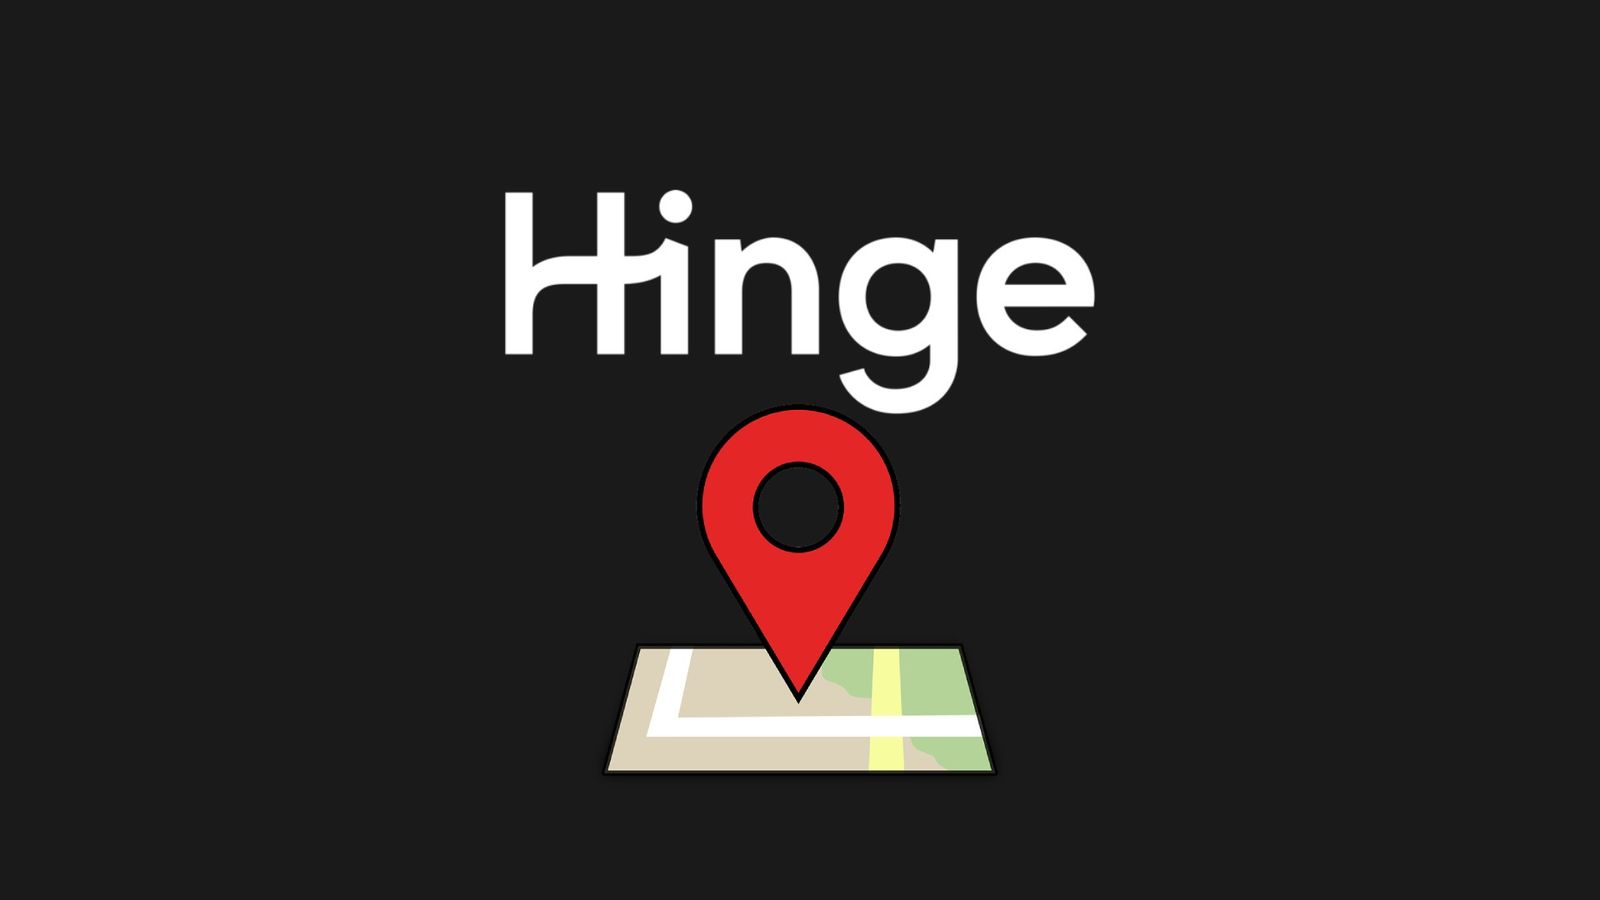 An image of the Hinge logo and a map pin icon - Does Hinge Automatically Update Your Location?